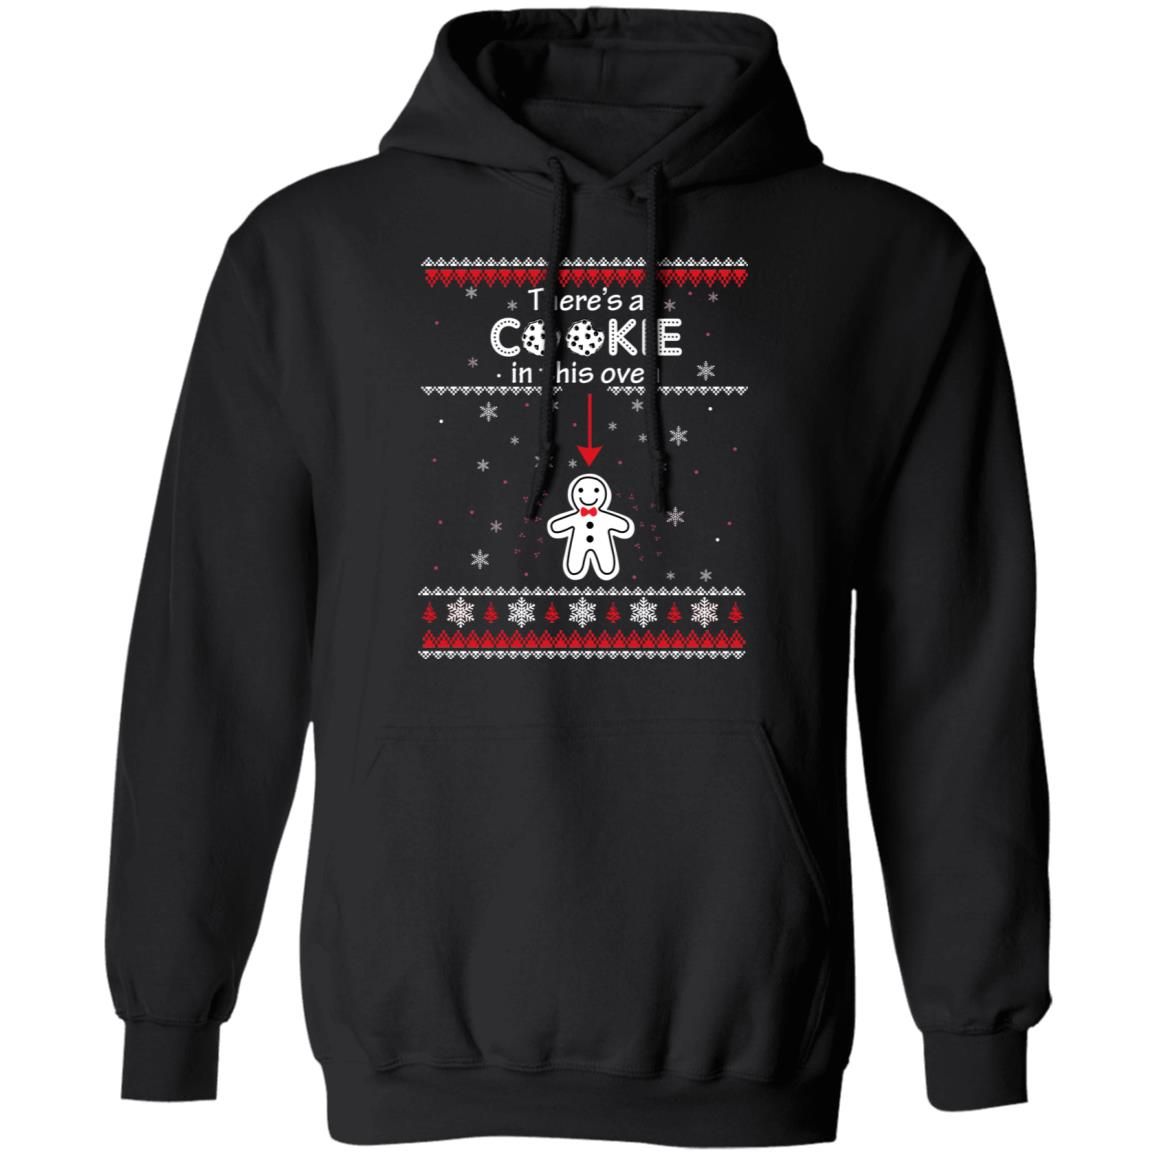 Christmas Couple There’s A Cookie In This Oven Shirt Hoodie Black S